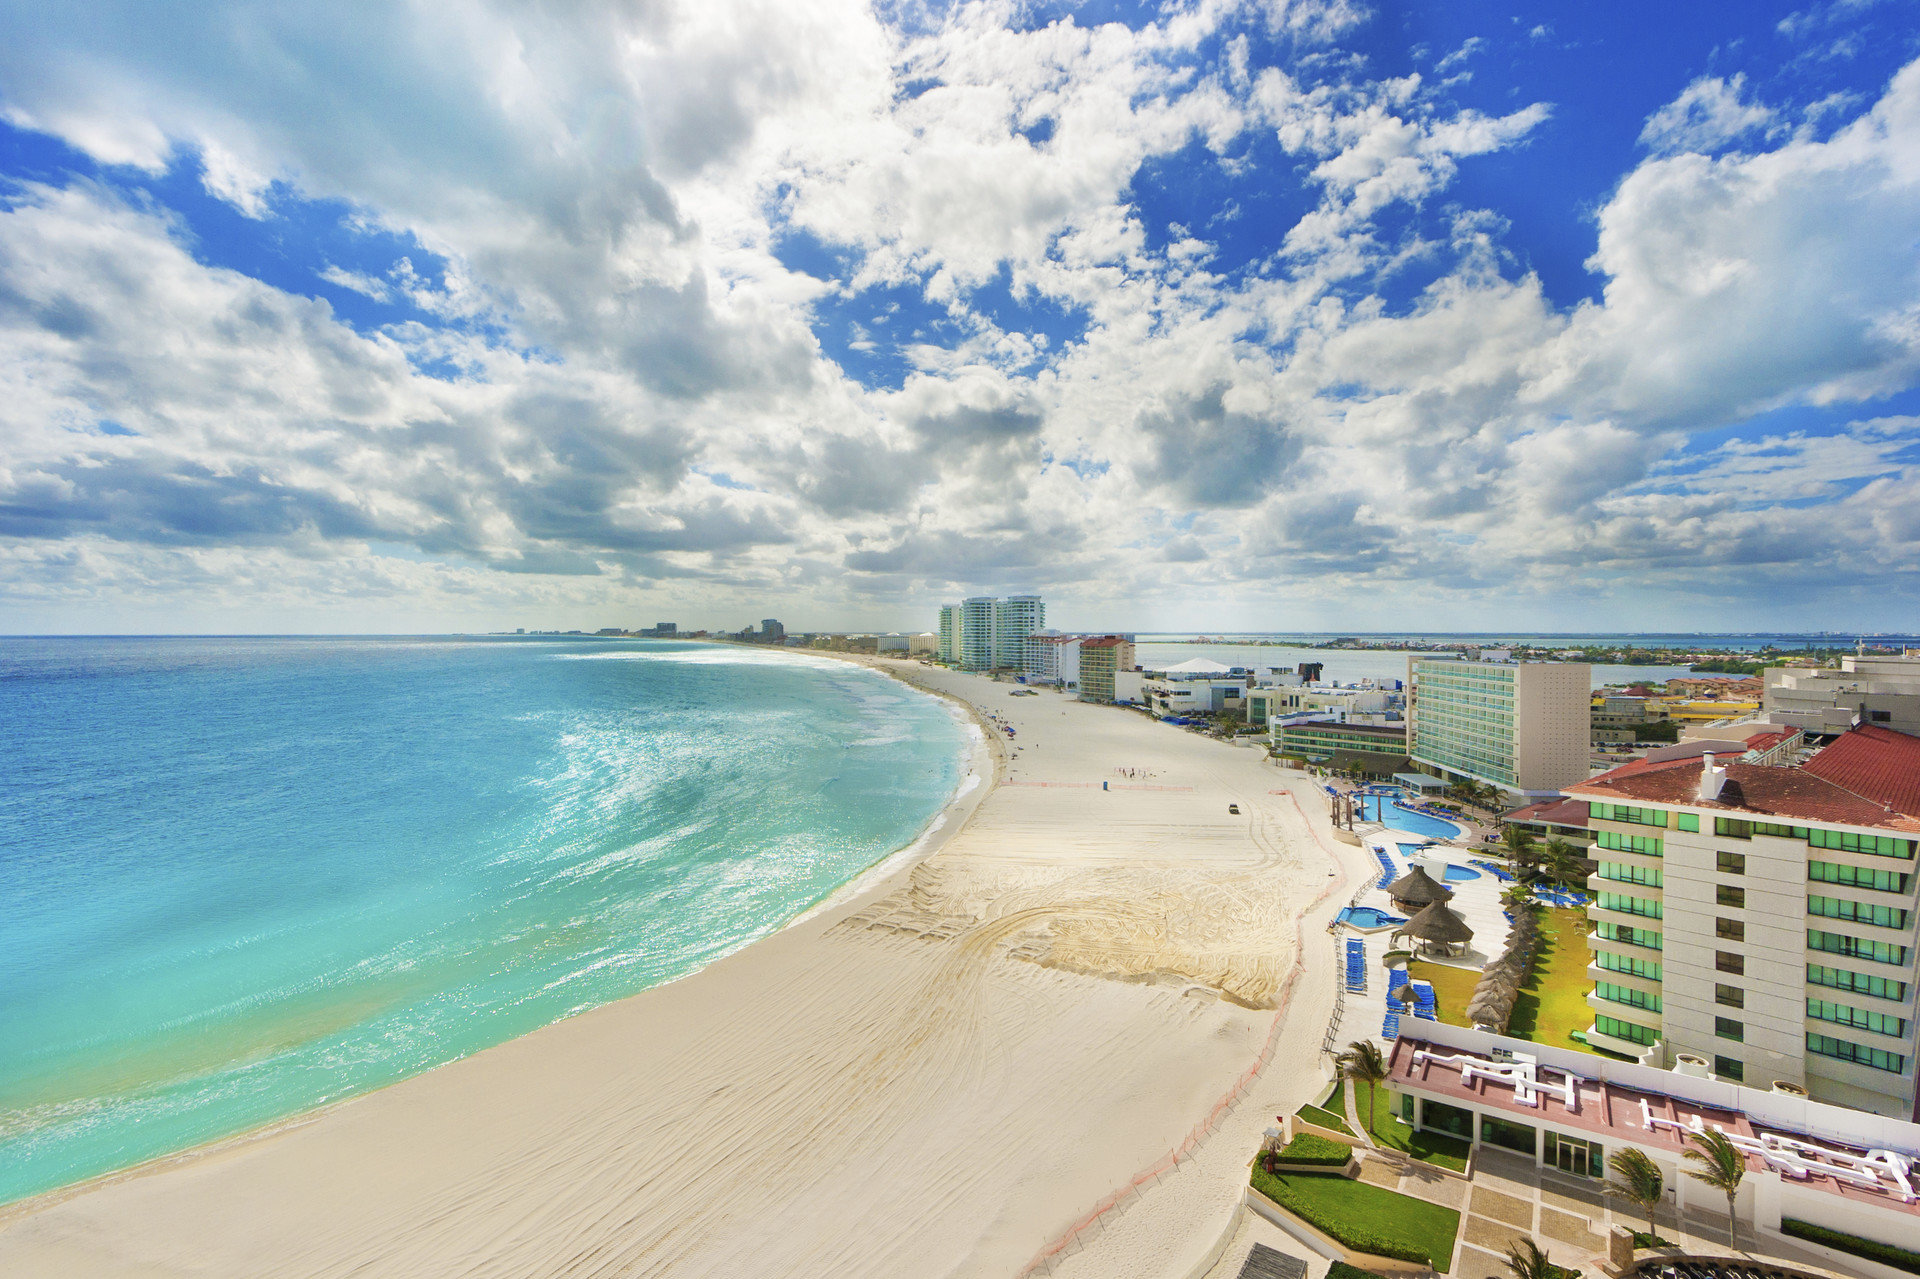 8 Things Every Traveler Should Know Before Going to Cancun